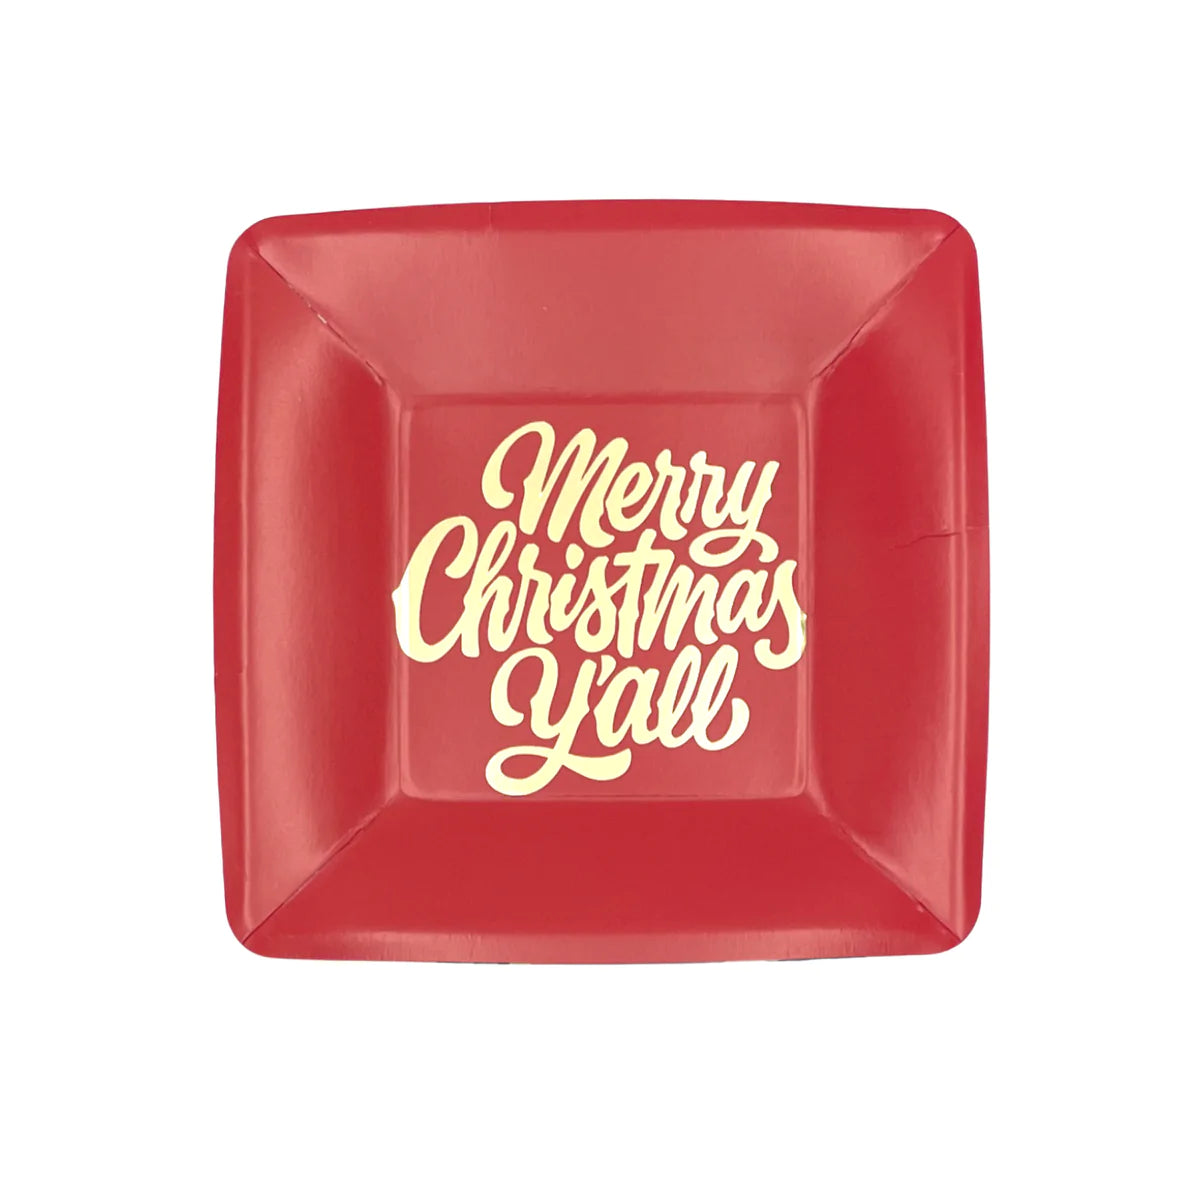 Merry Christmas Y'all Dessert Plates (Set of 8)